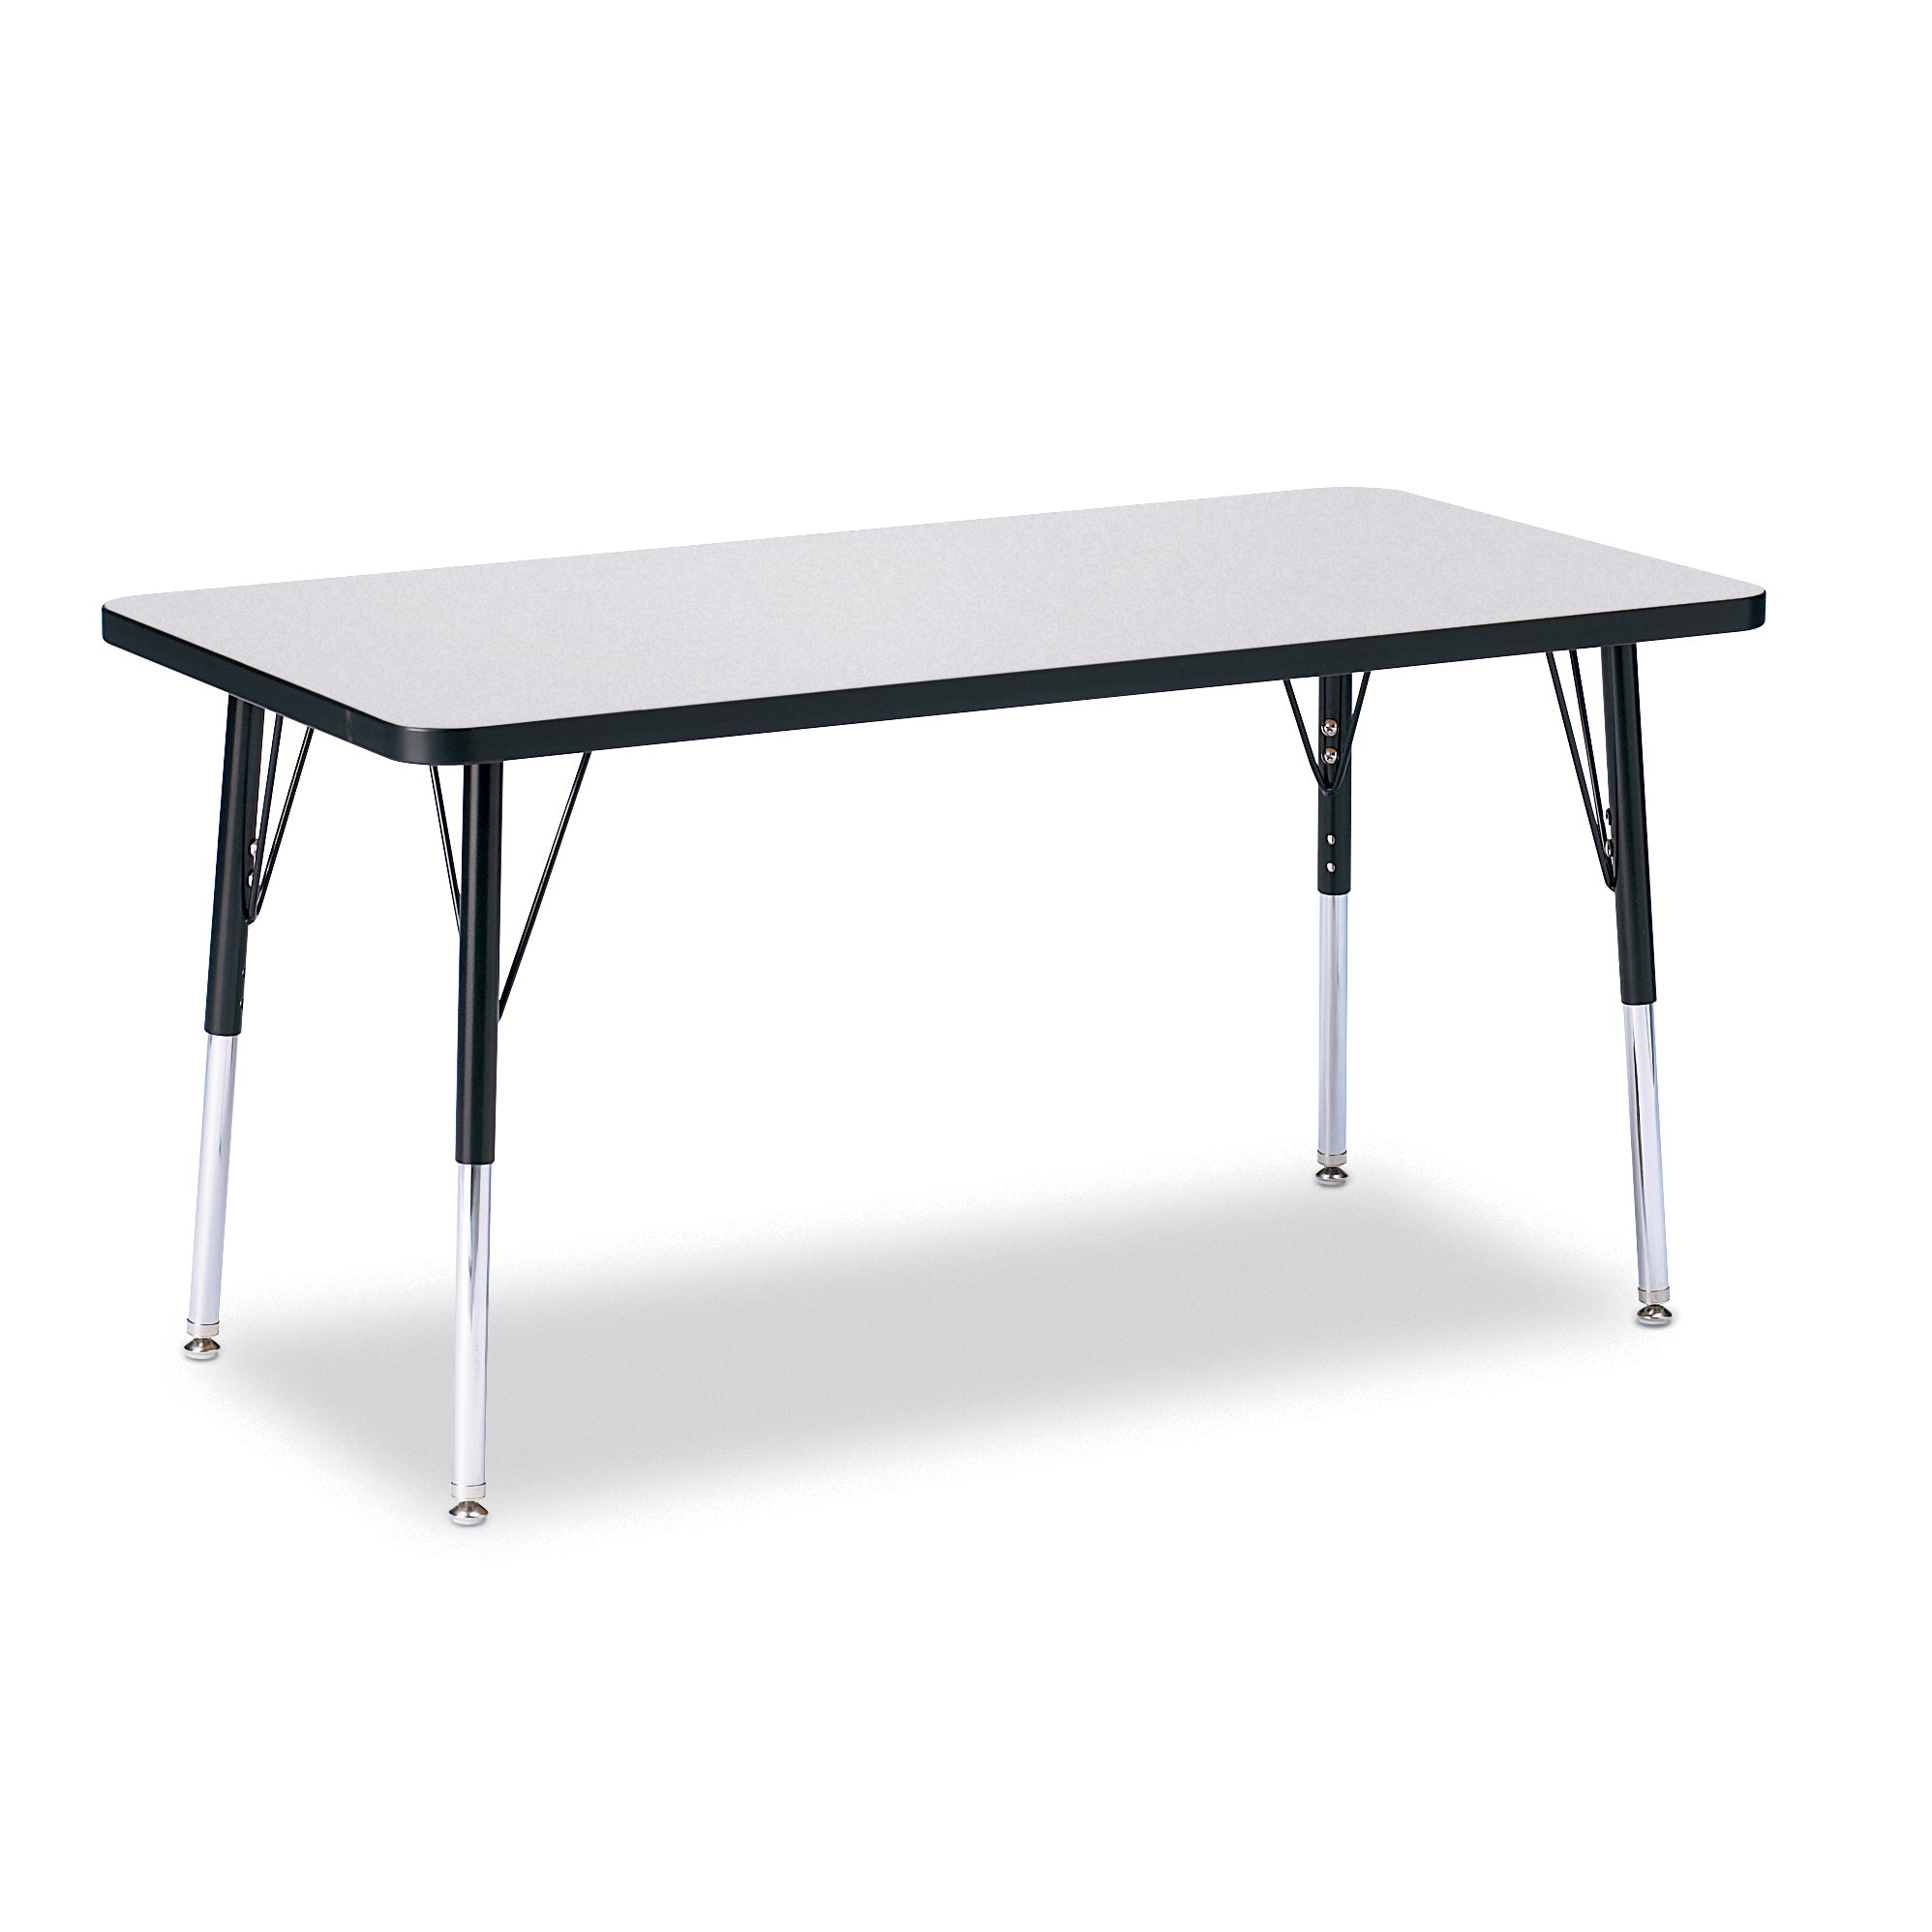 6403JCA180, Berries Rectangle Activity Table - 24" X 48", A-height - Freckled Gray/Black/Black